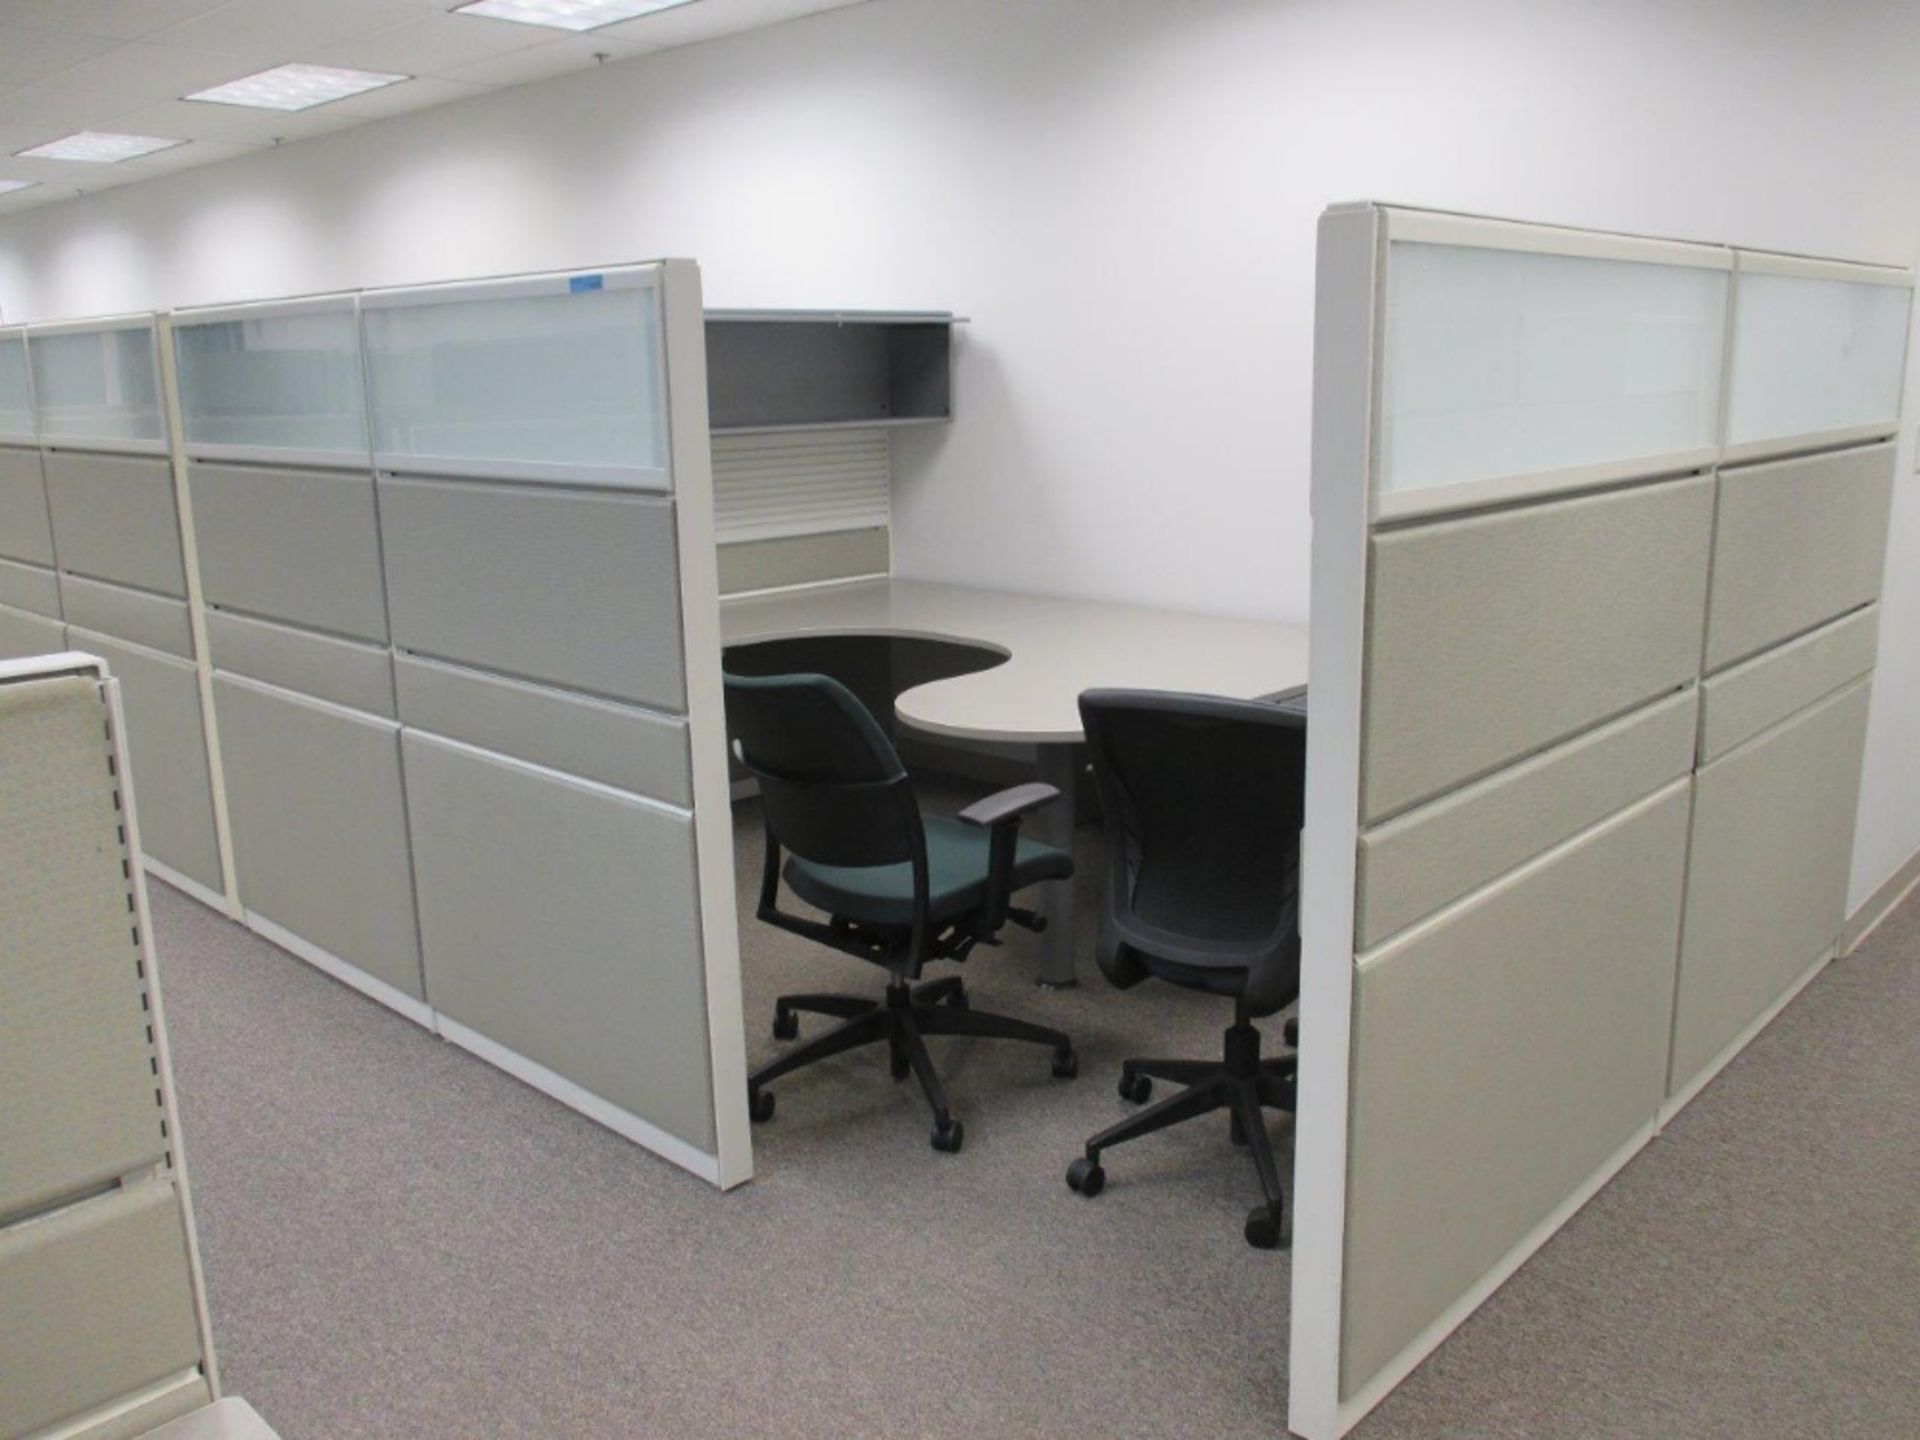 2008 Tecknion T Shaped 2 Station Cubicle w/ 1 Freestanding divider